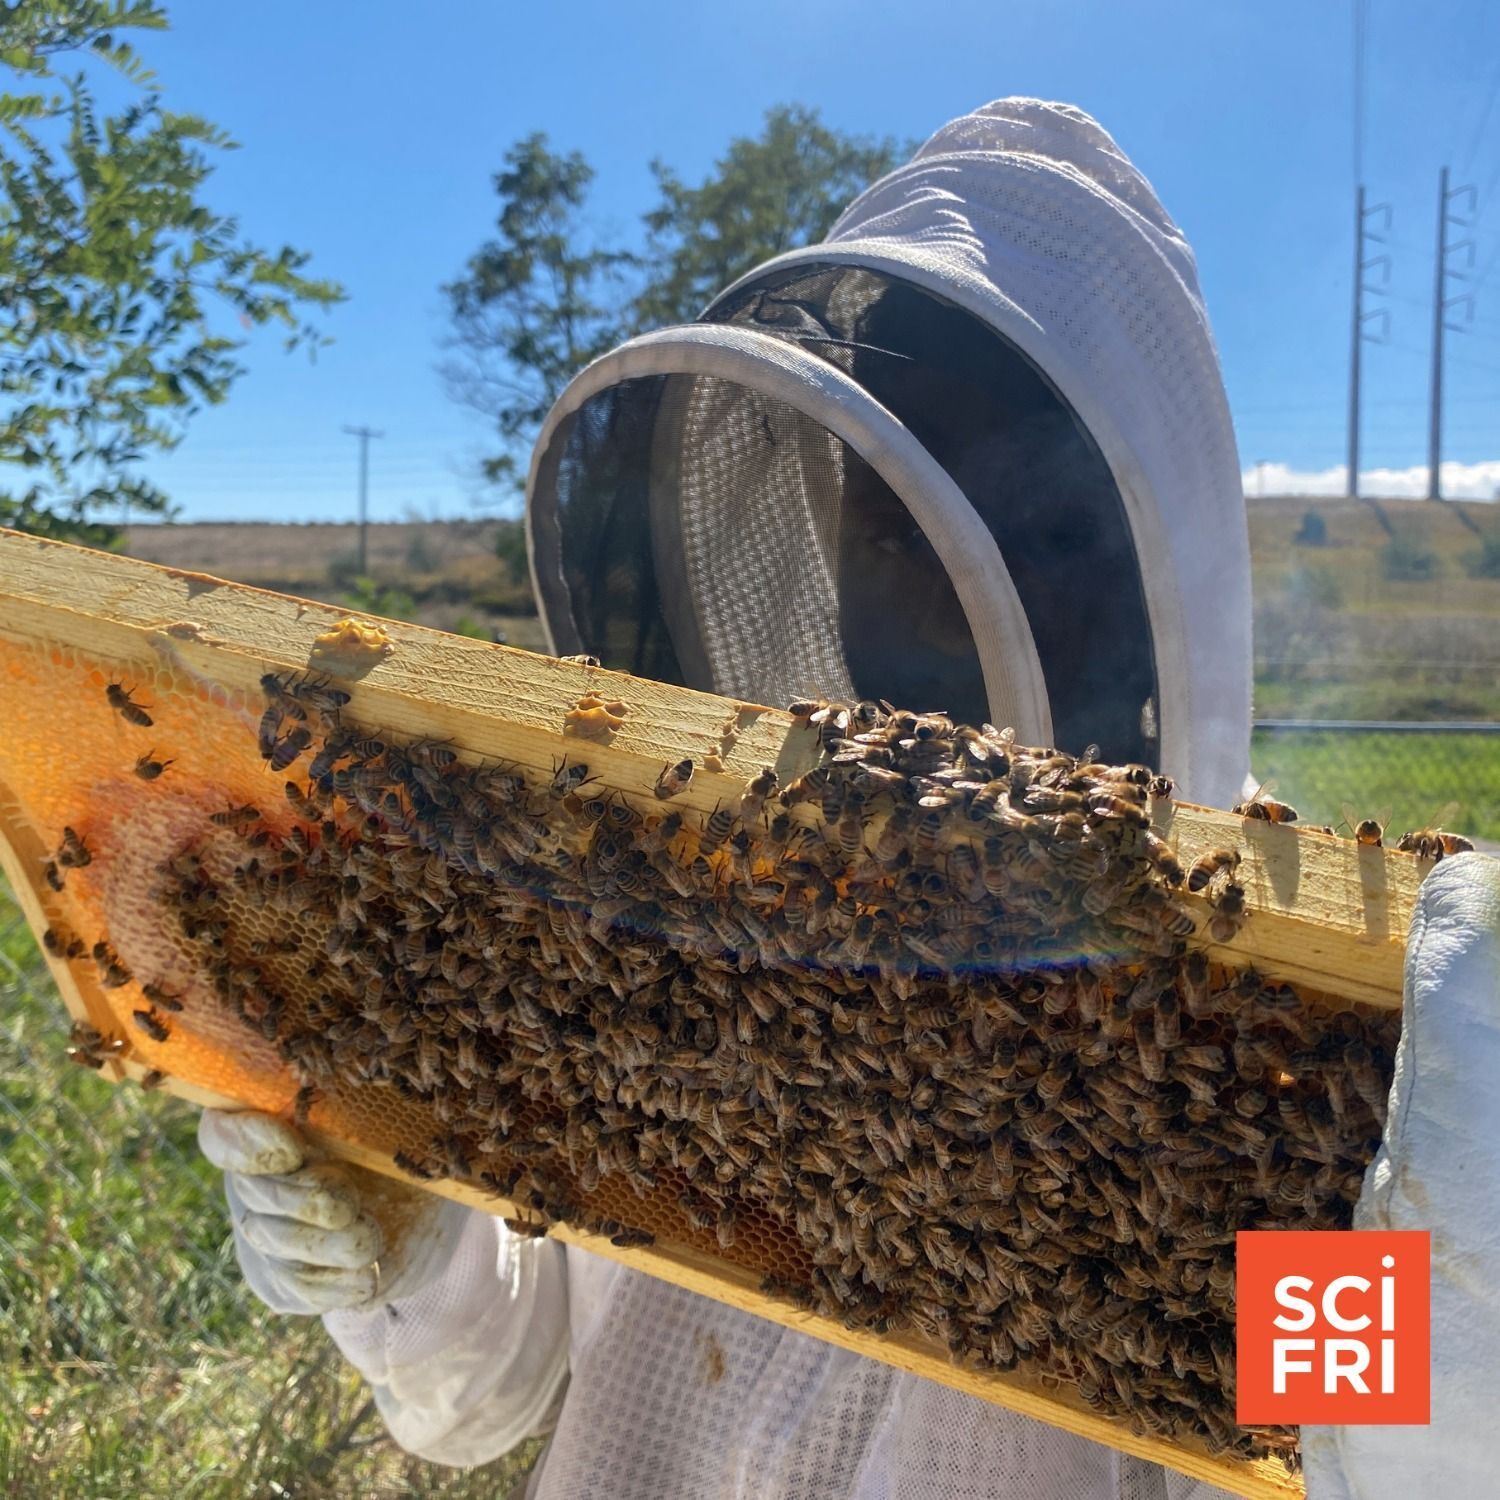 751: Inside The Race To Save Honeybees From Parasitic Mites